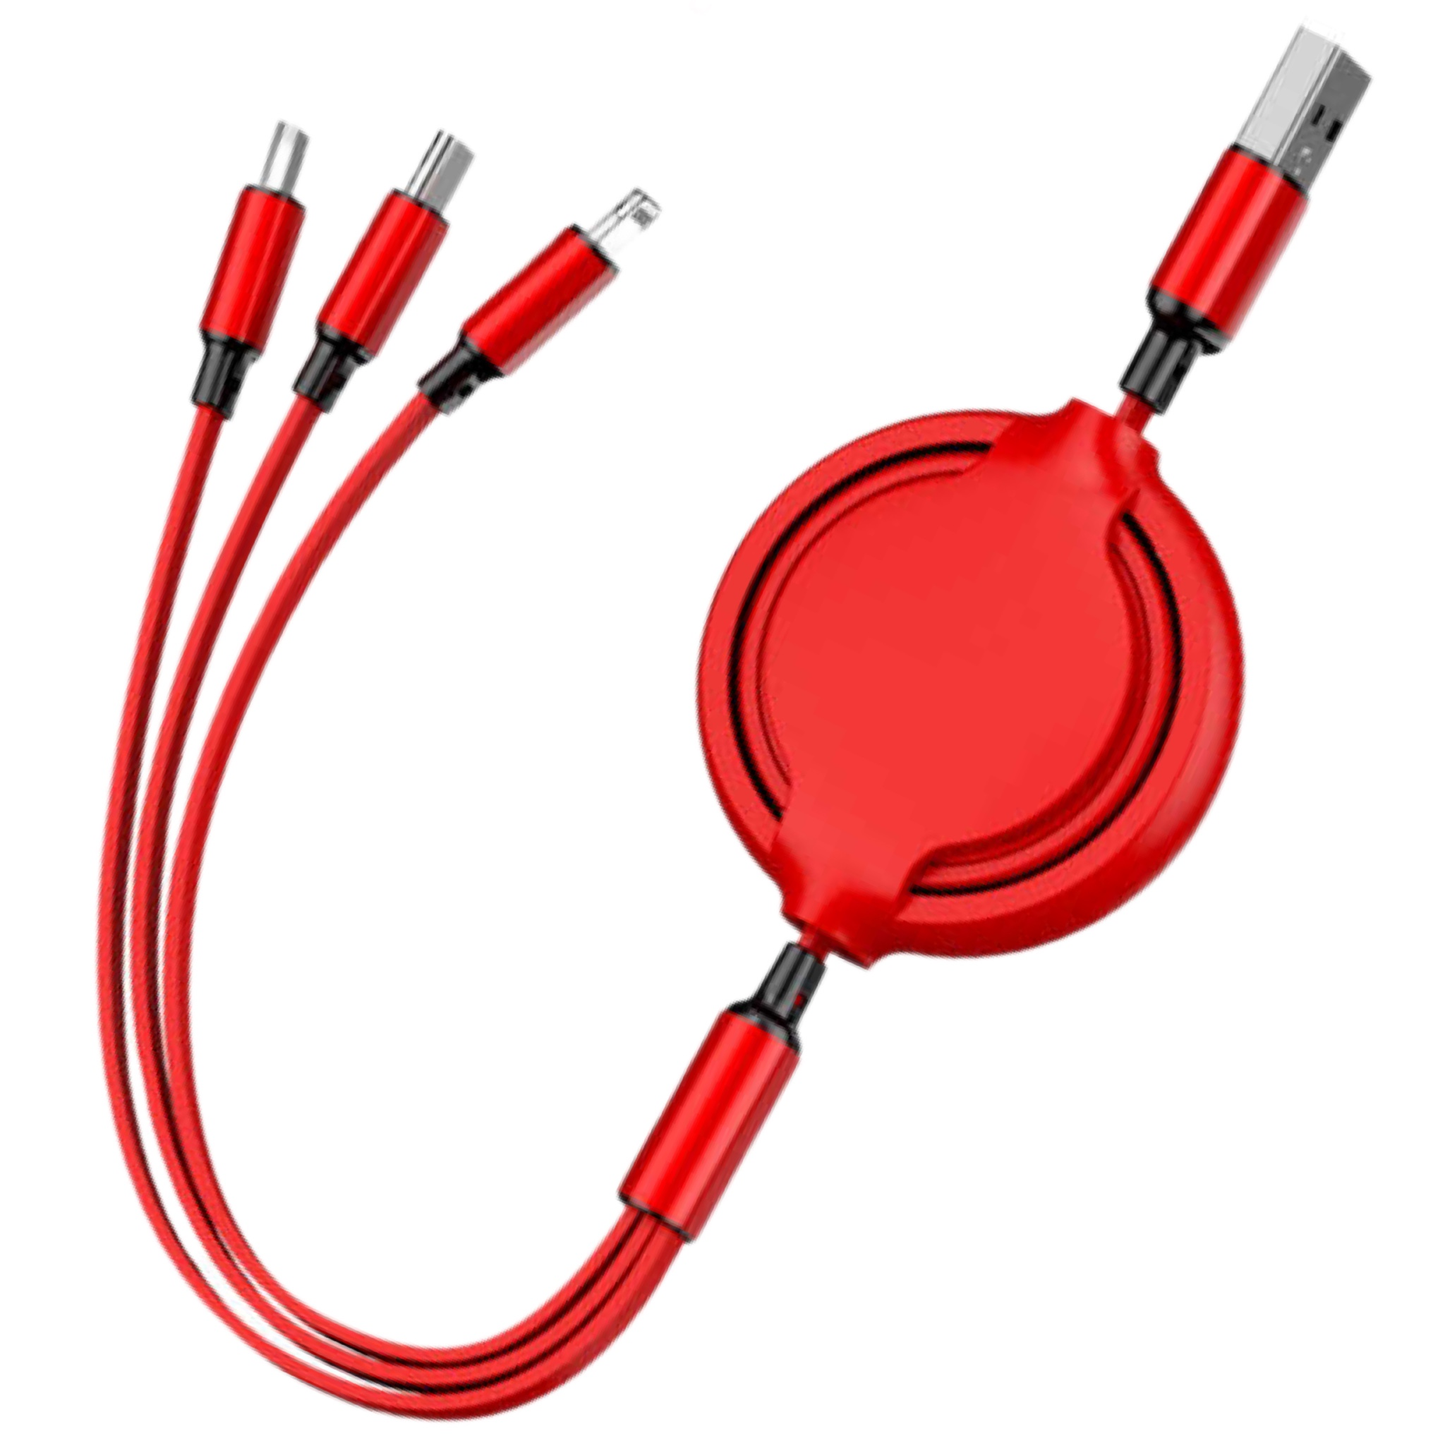 3-in-1 Retractable USB Fast Charging Cable Compatible with iPhone/Type C/Micro USB (Red)